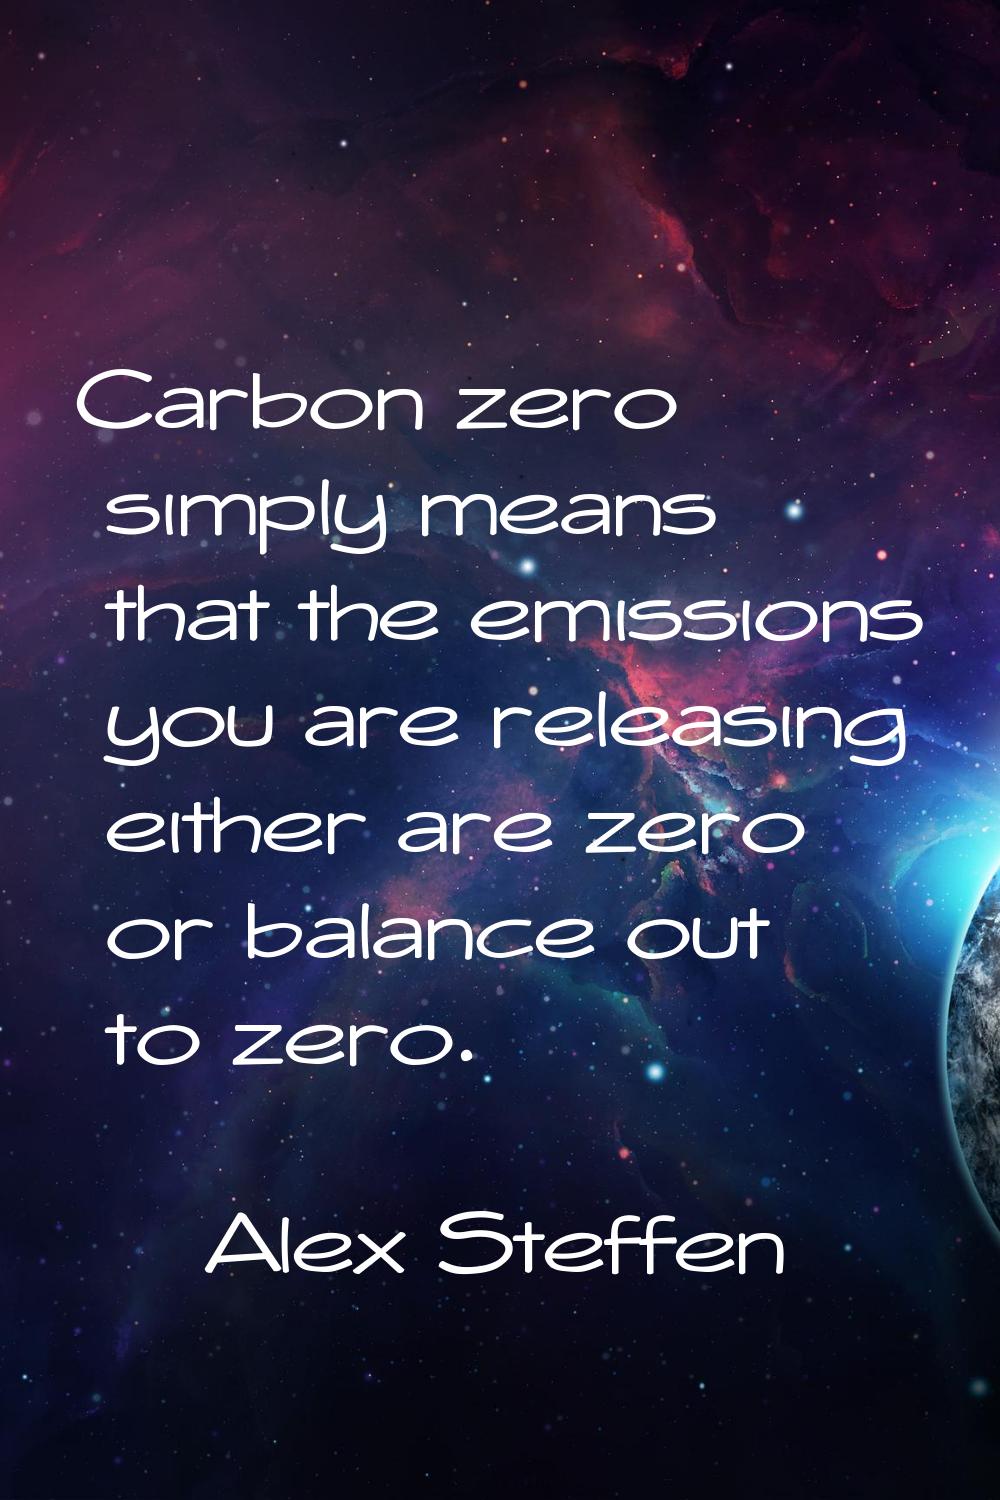 Carbon zero simply means that the emissions you are releasing either are zero or balance out to zer